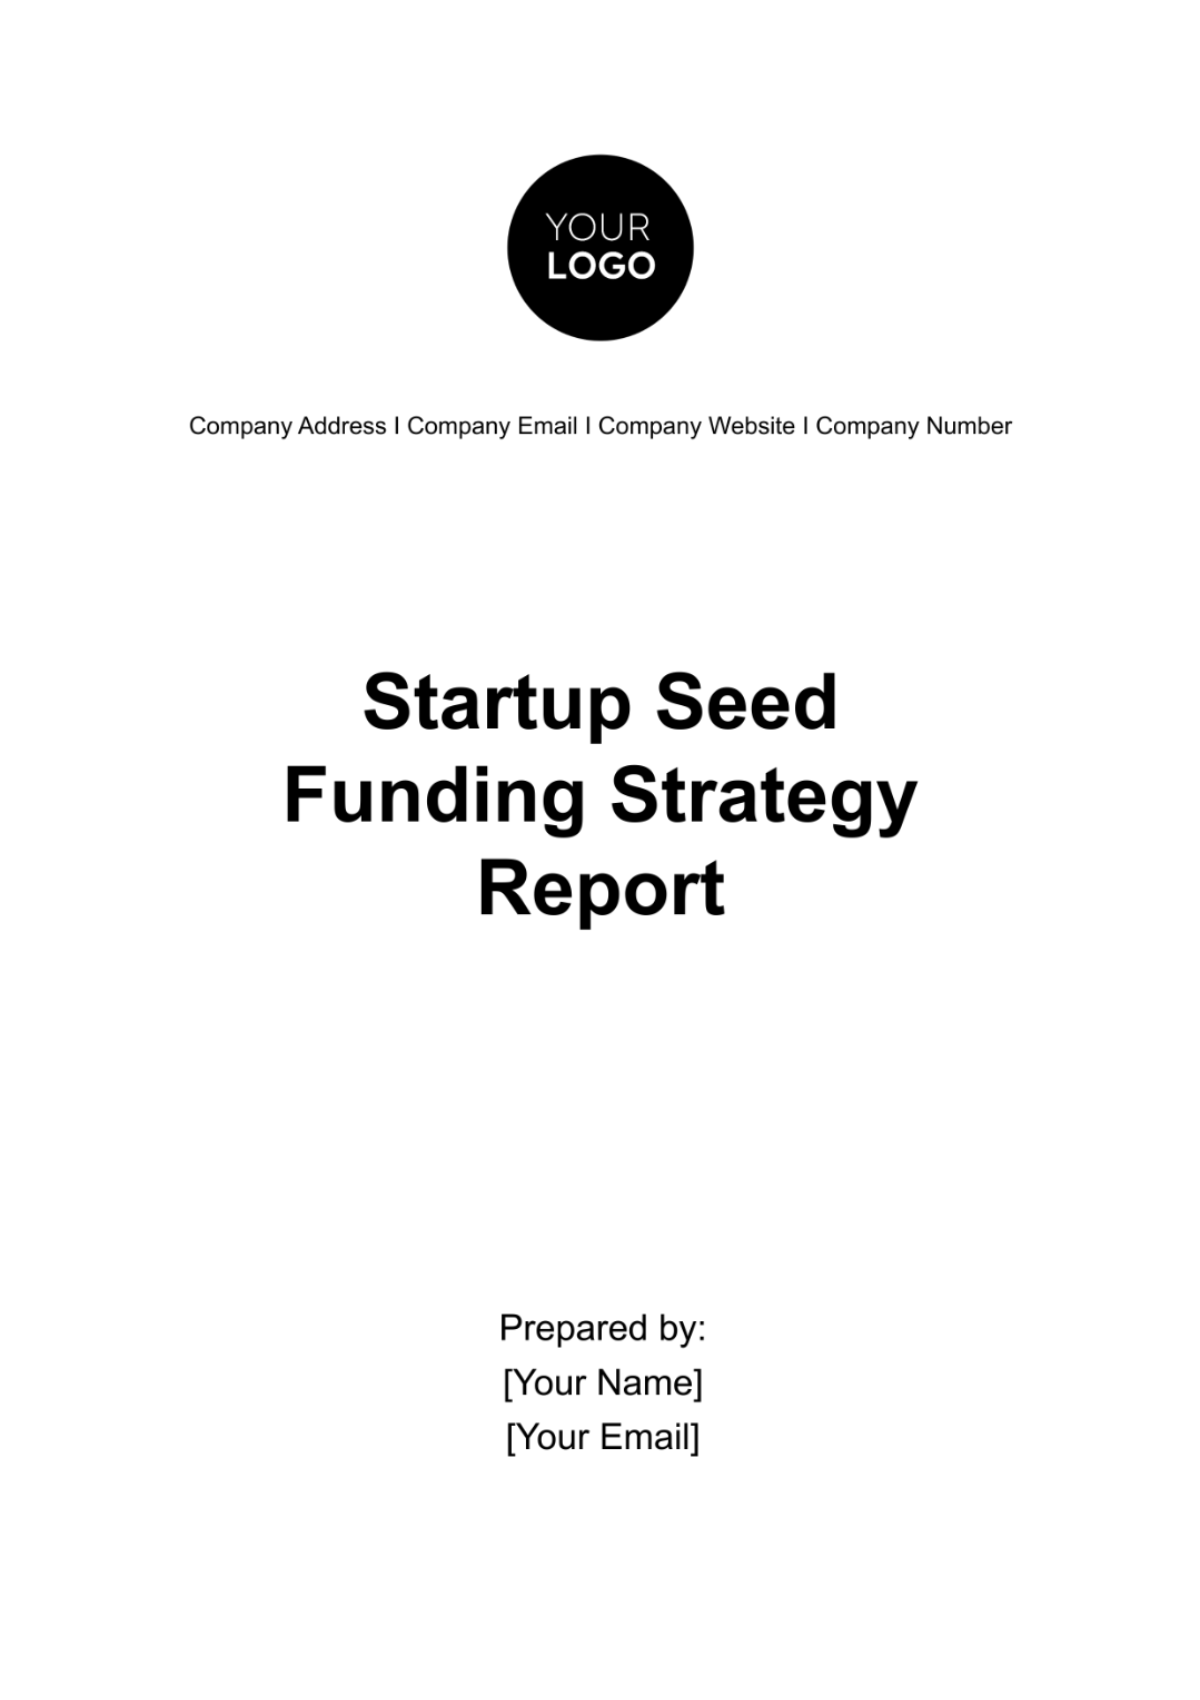 Startup Seed Funding Strategy Report Template